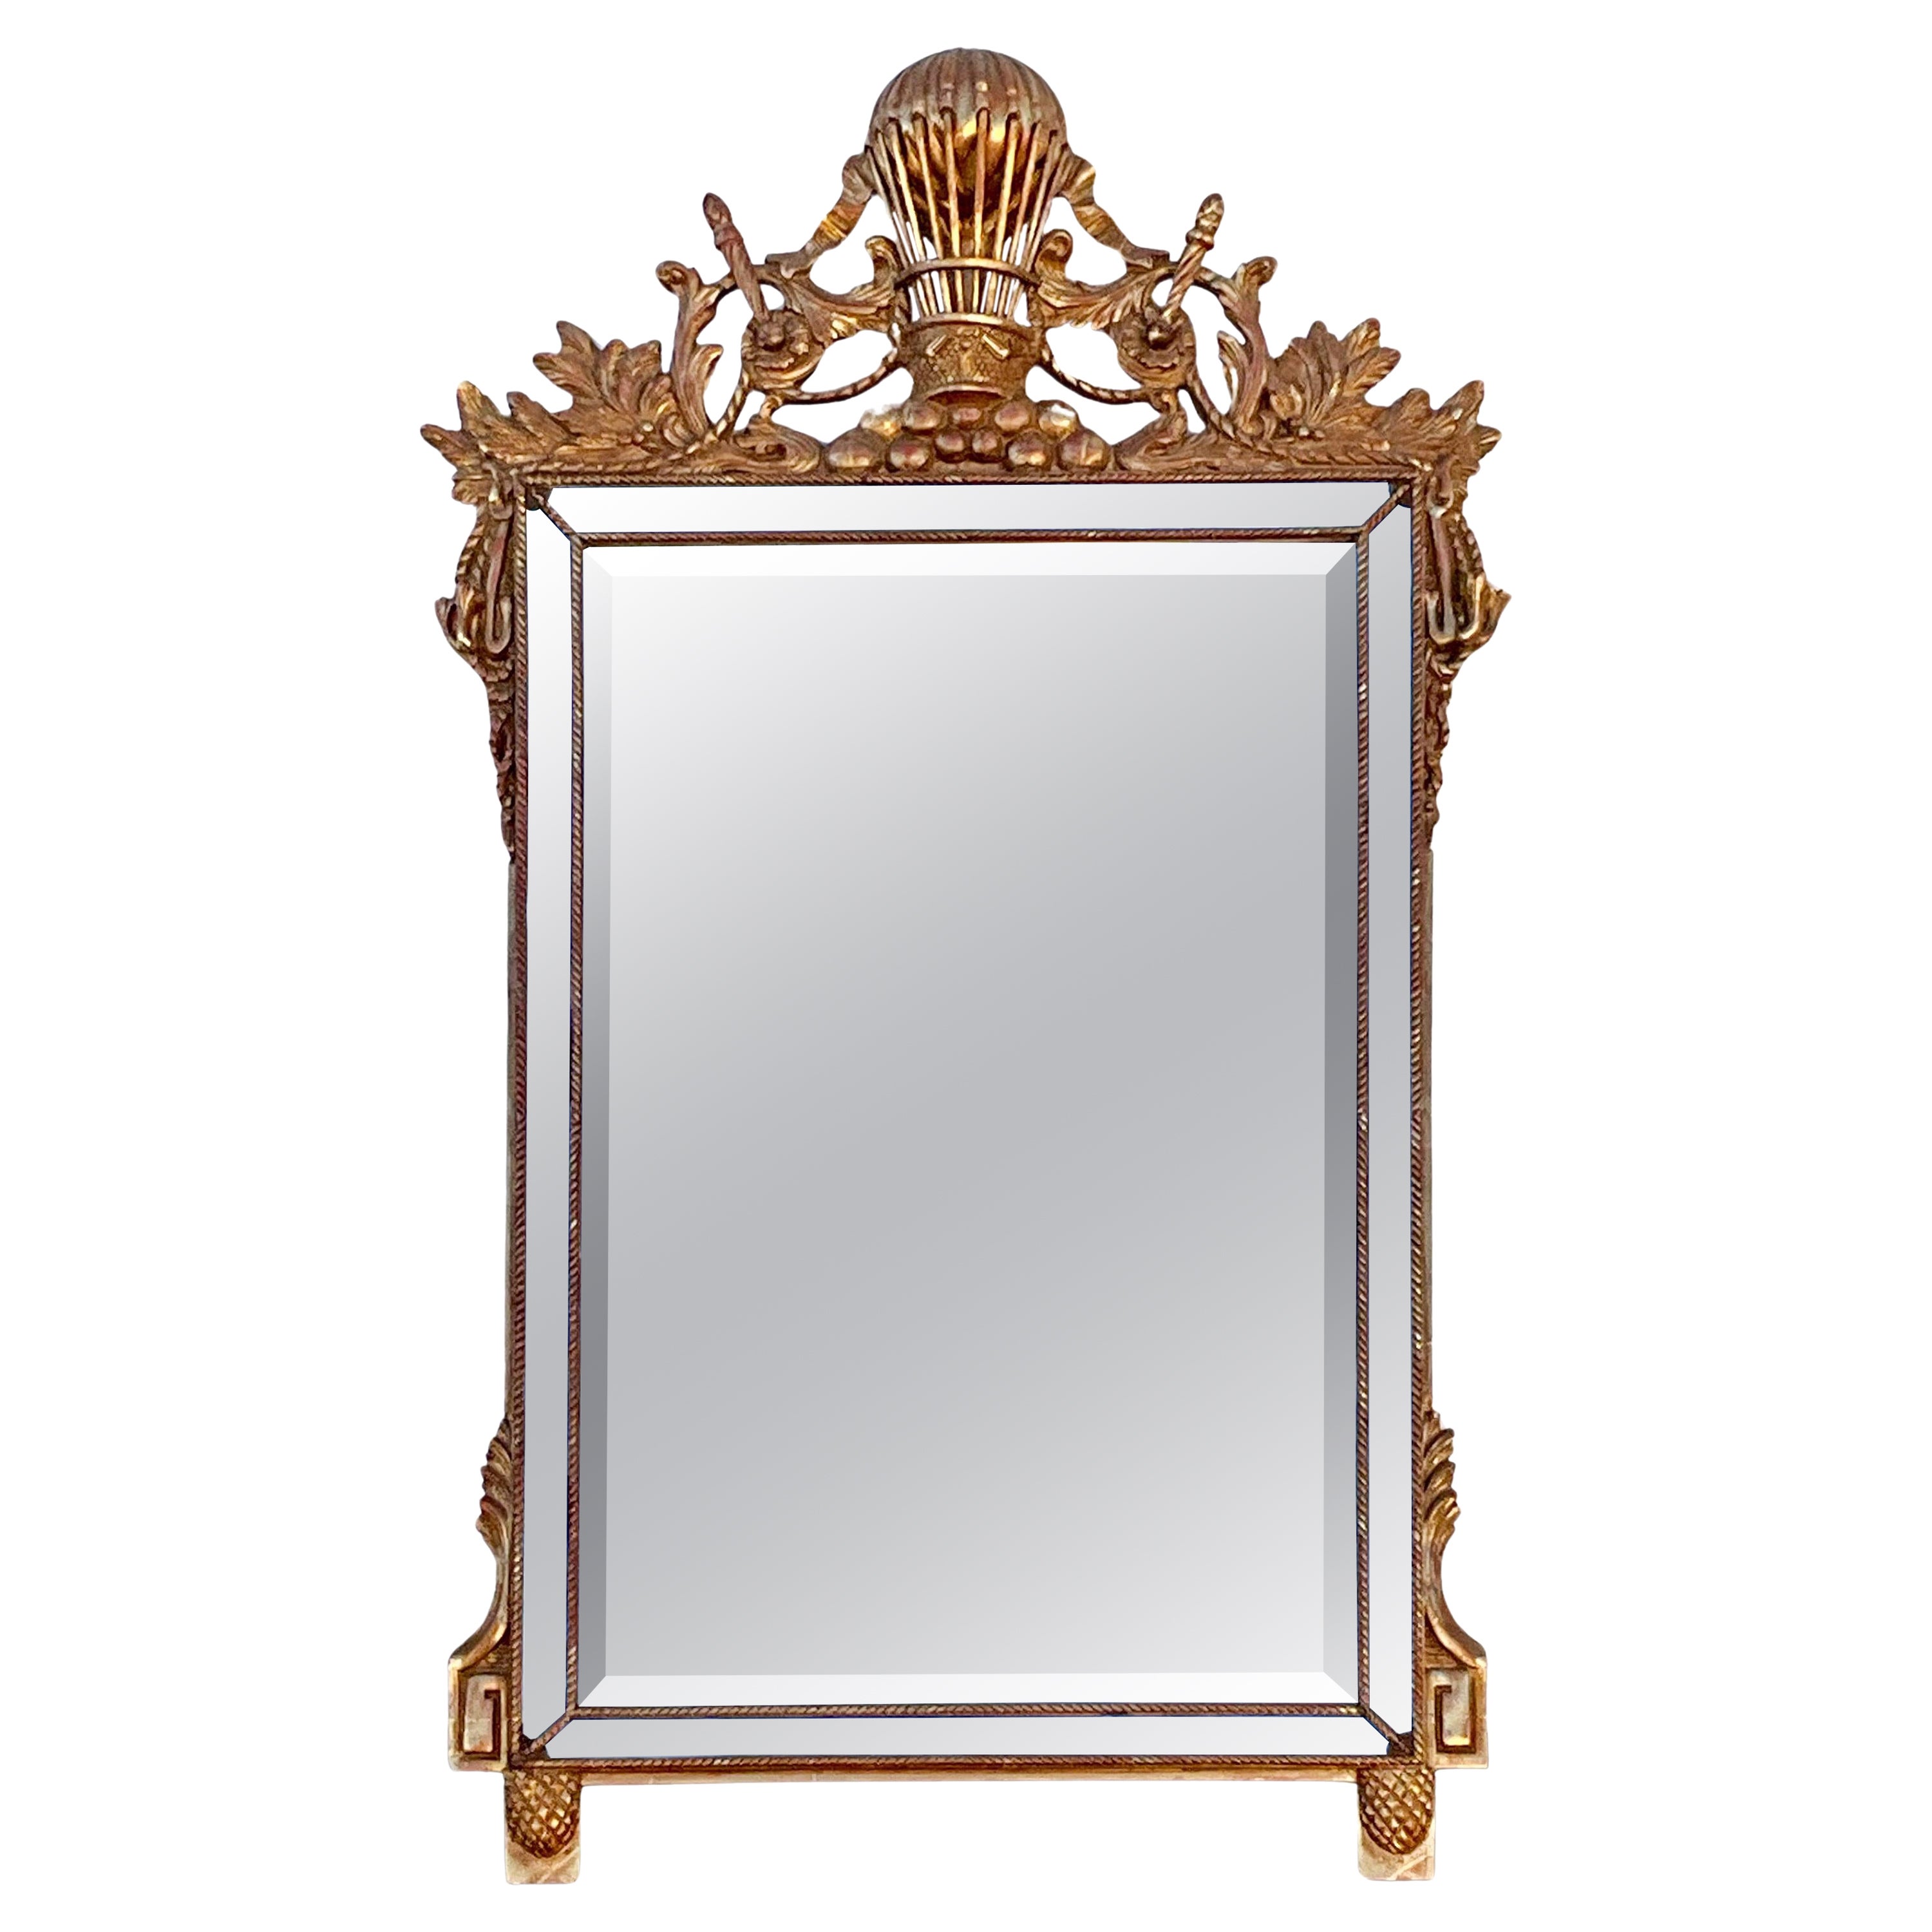 Italian Carved Giltwood Balloon Form French Empire Inspired Wall Mirror